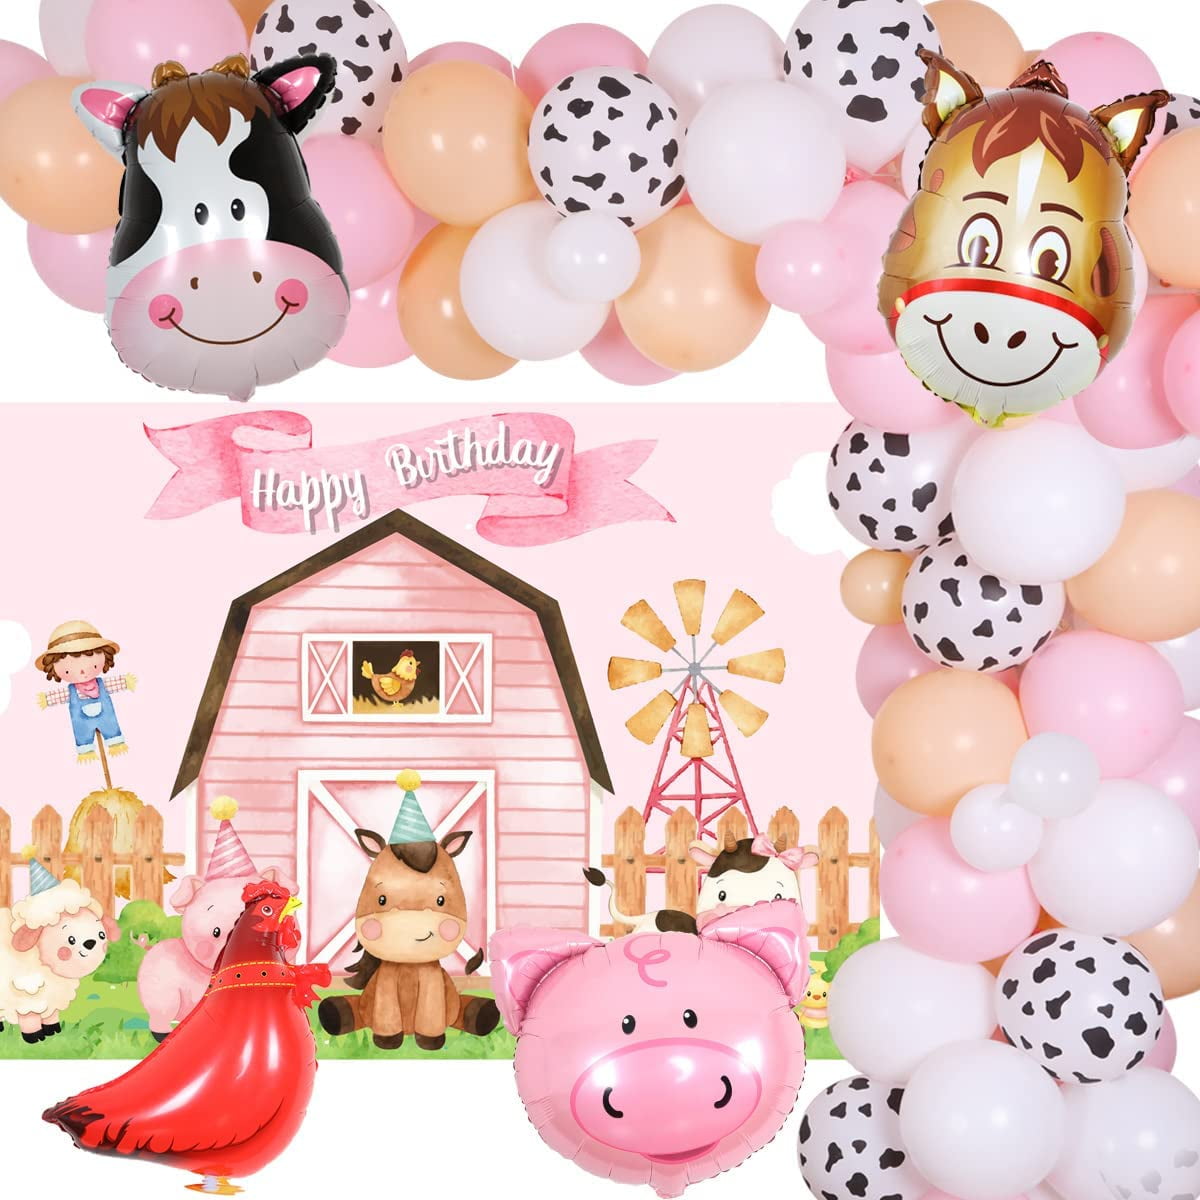 Pig Birthday Party Favors for Girls, Art Party Activities, Farm